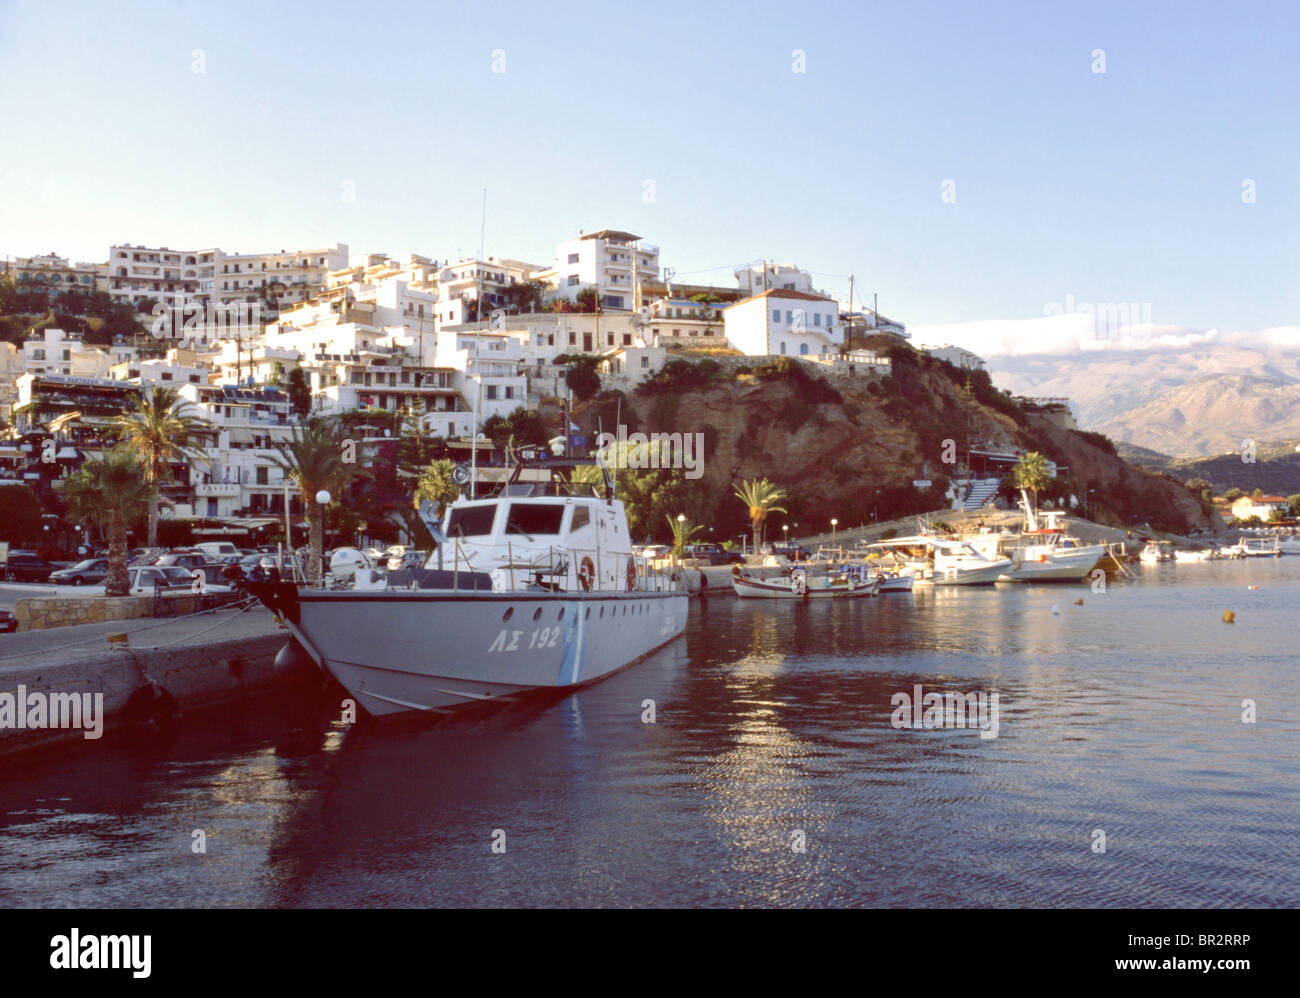 A Greek coastguard vessel moored at Agia Galini harbour in Crete, with cloud-capped mount psiloritis in the background. Stock Photo